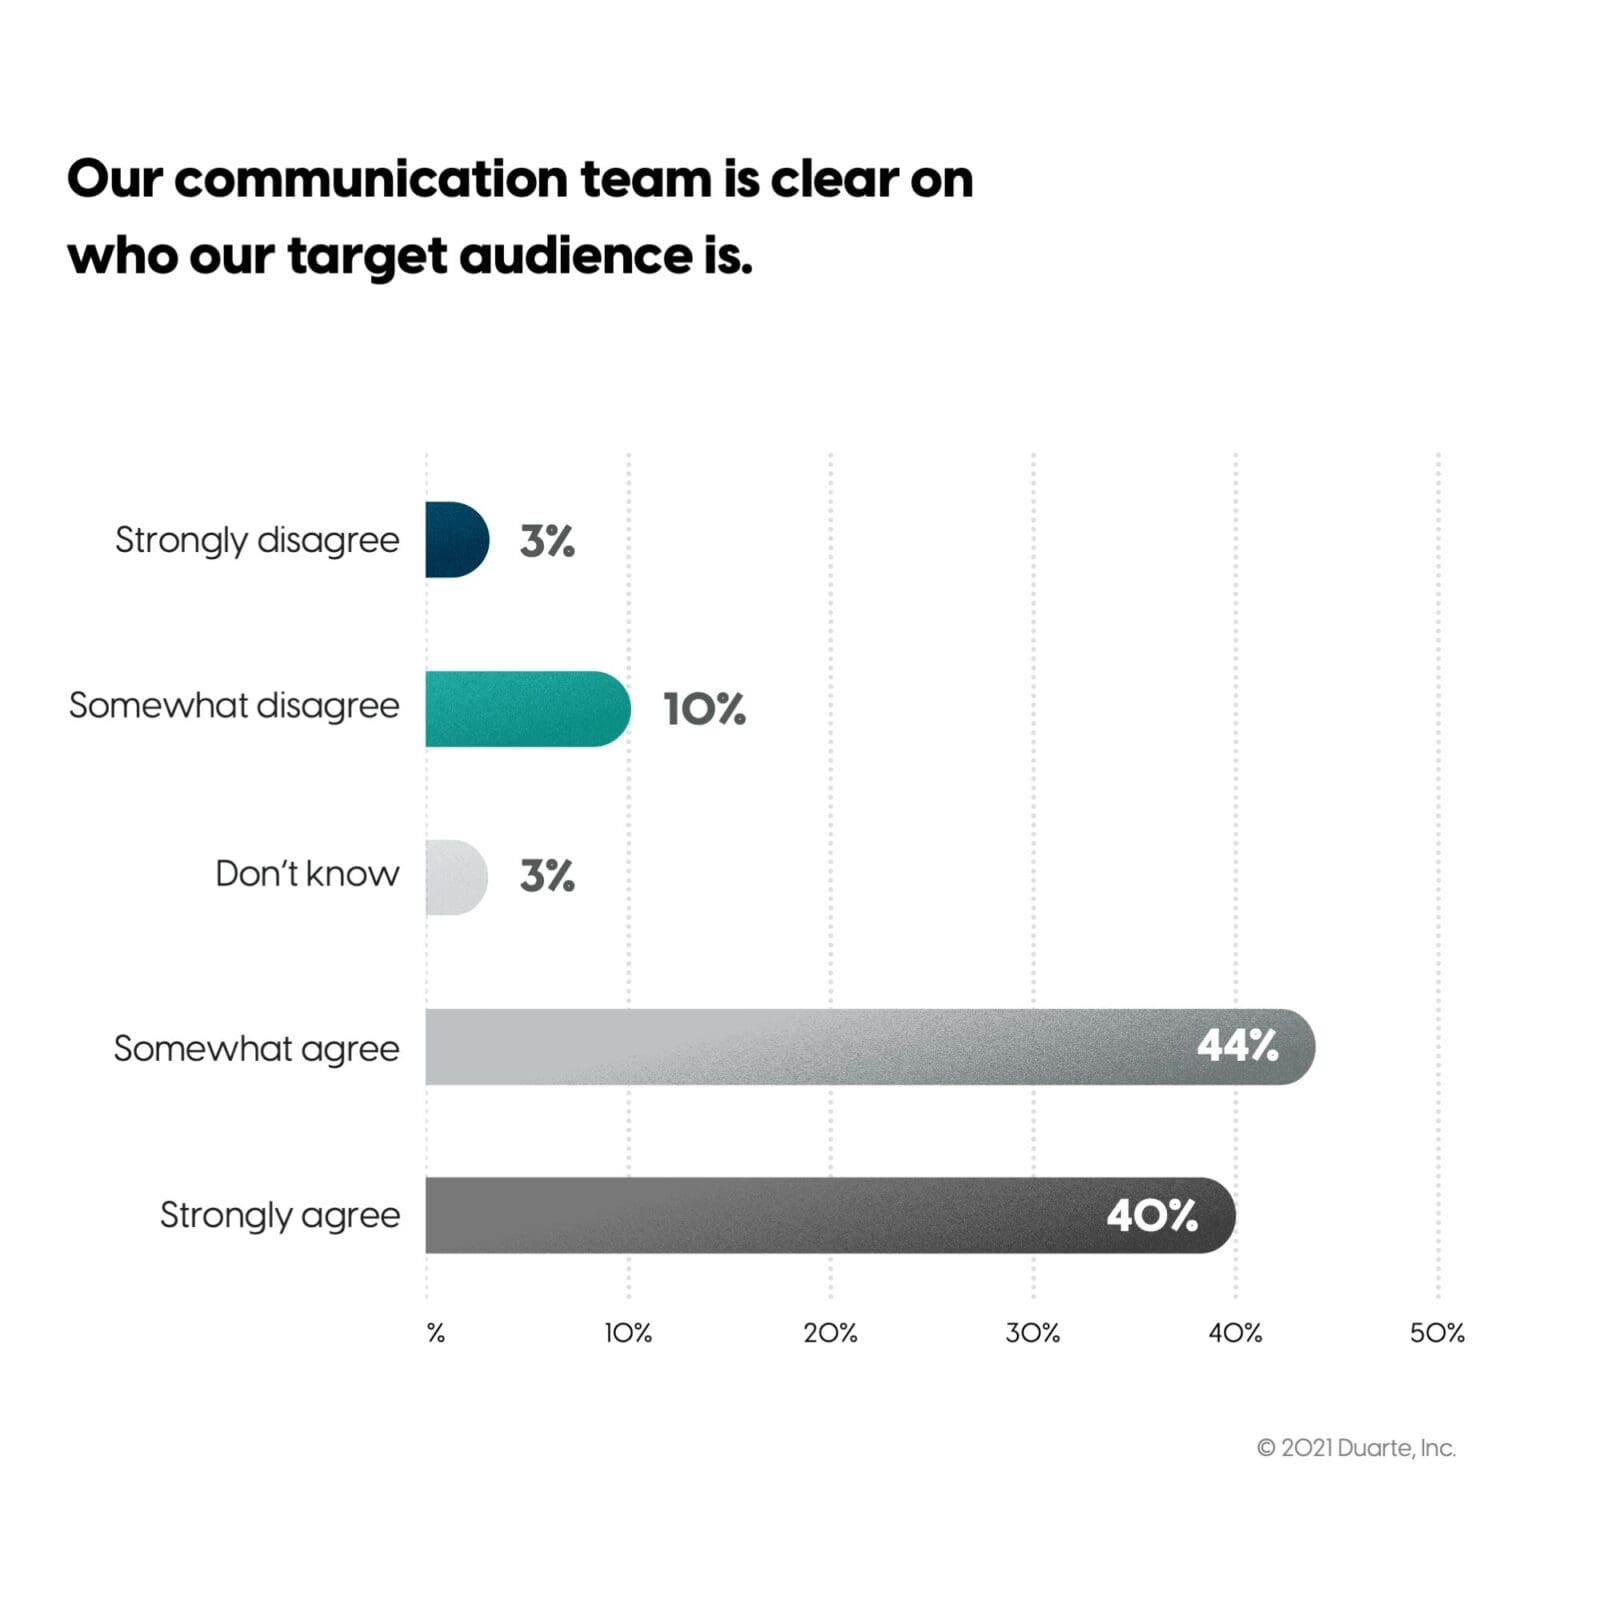 Survey results for question: Our communication is clear on who our target audience is. Majority (44%) said they "Somewhat agree."